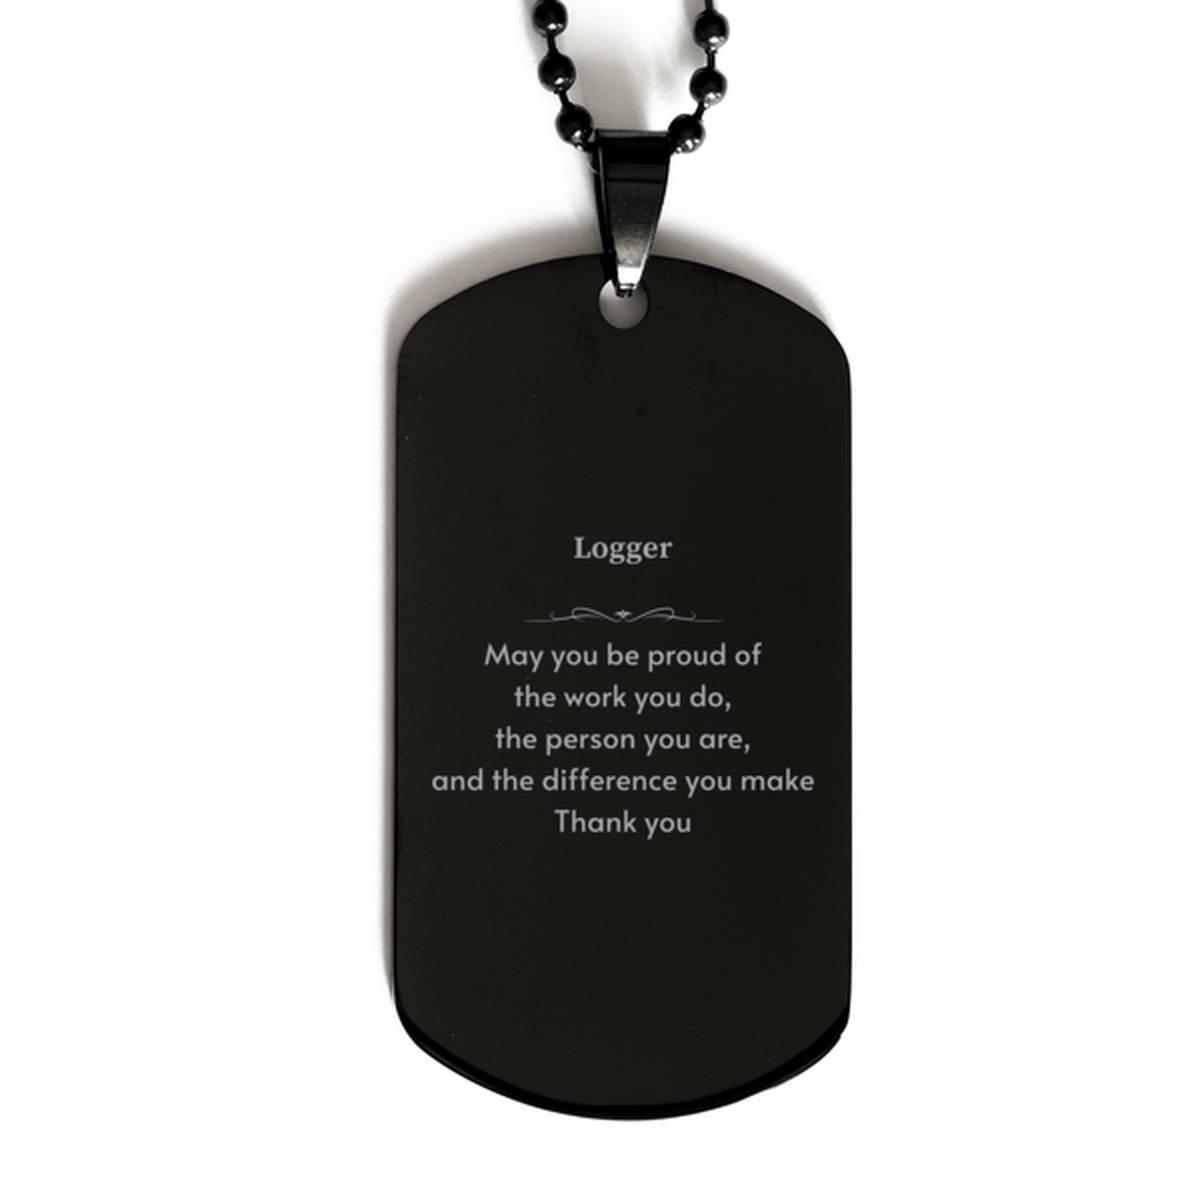 Heartwarming Black Dog Tag Retirement Coworkers Gifts for Logger, Logger May You be proud of the work you do, the person you are Gifts for Boss Men Women Friends